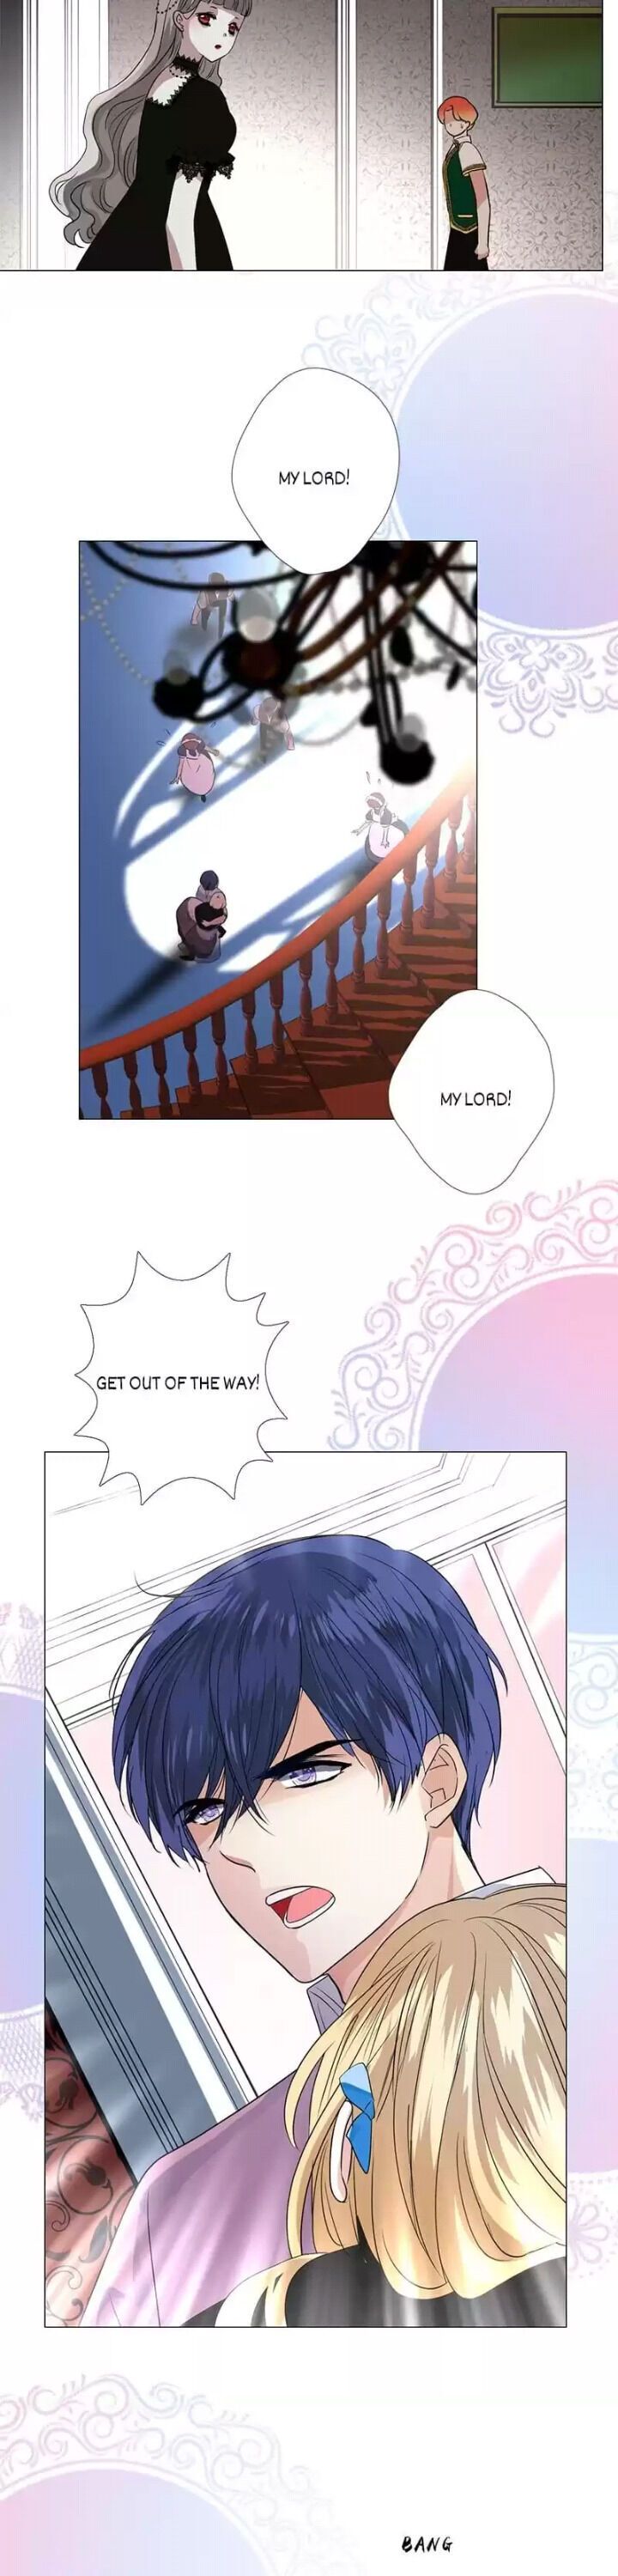 Unbending Flower Chapter 41 page 2